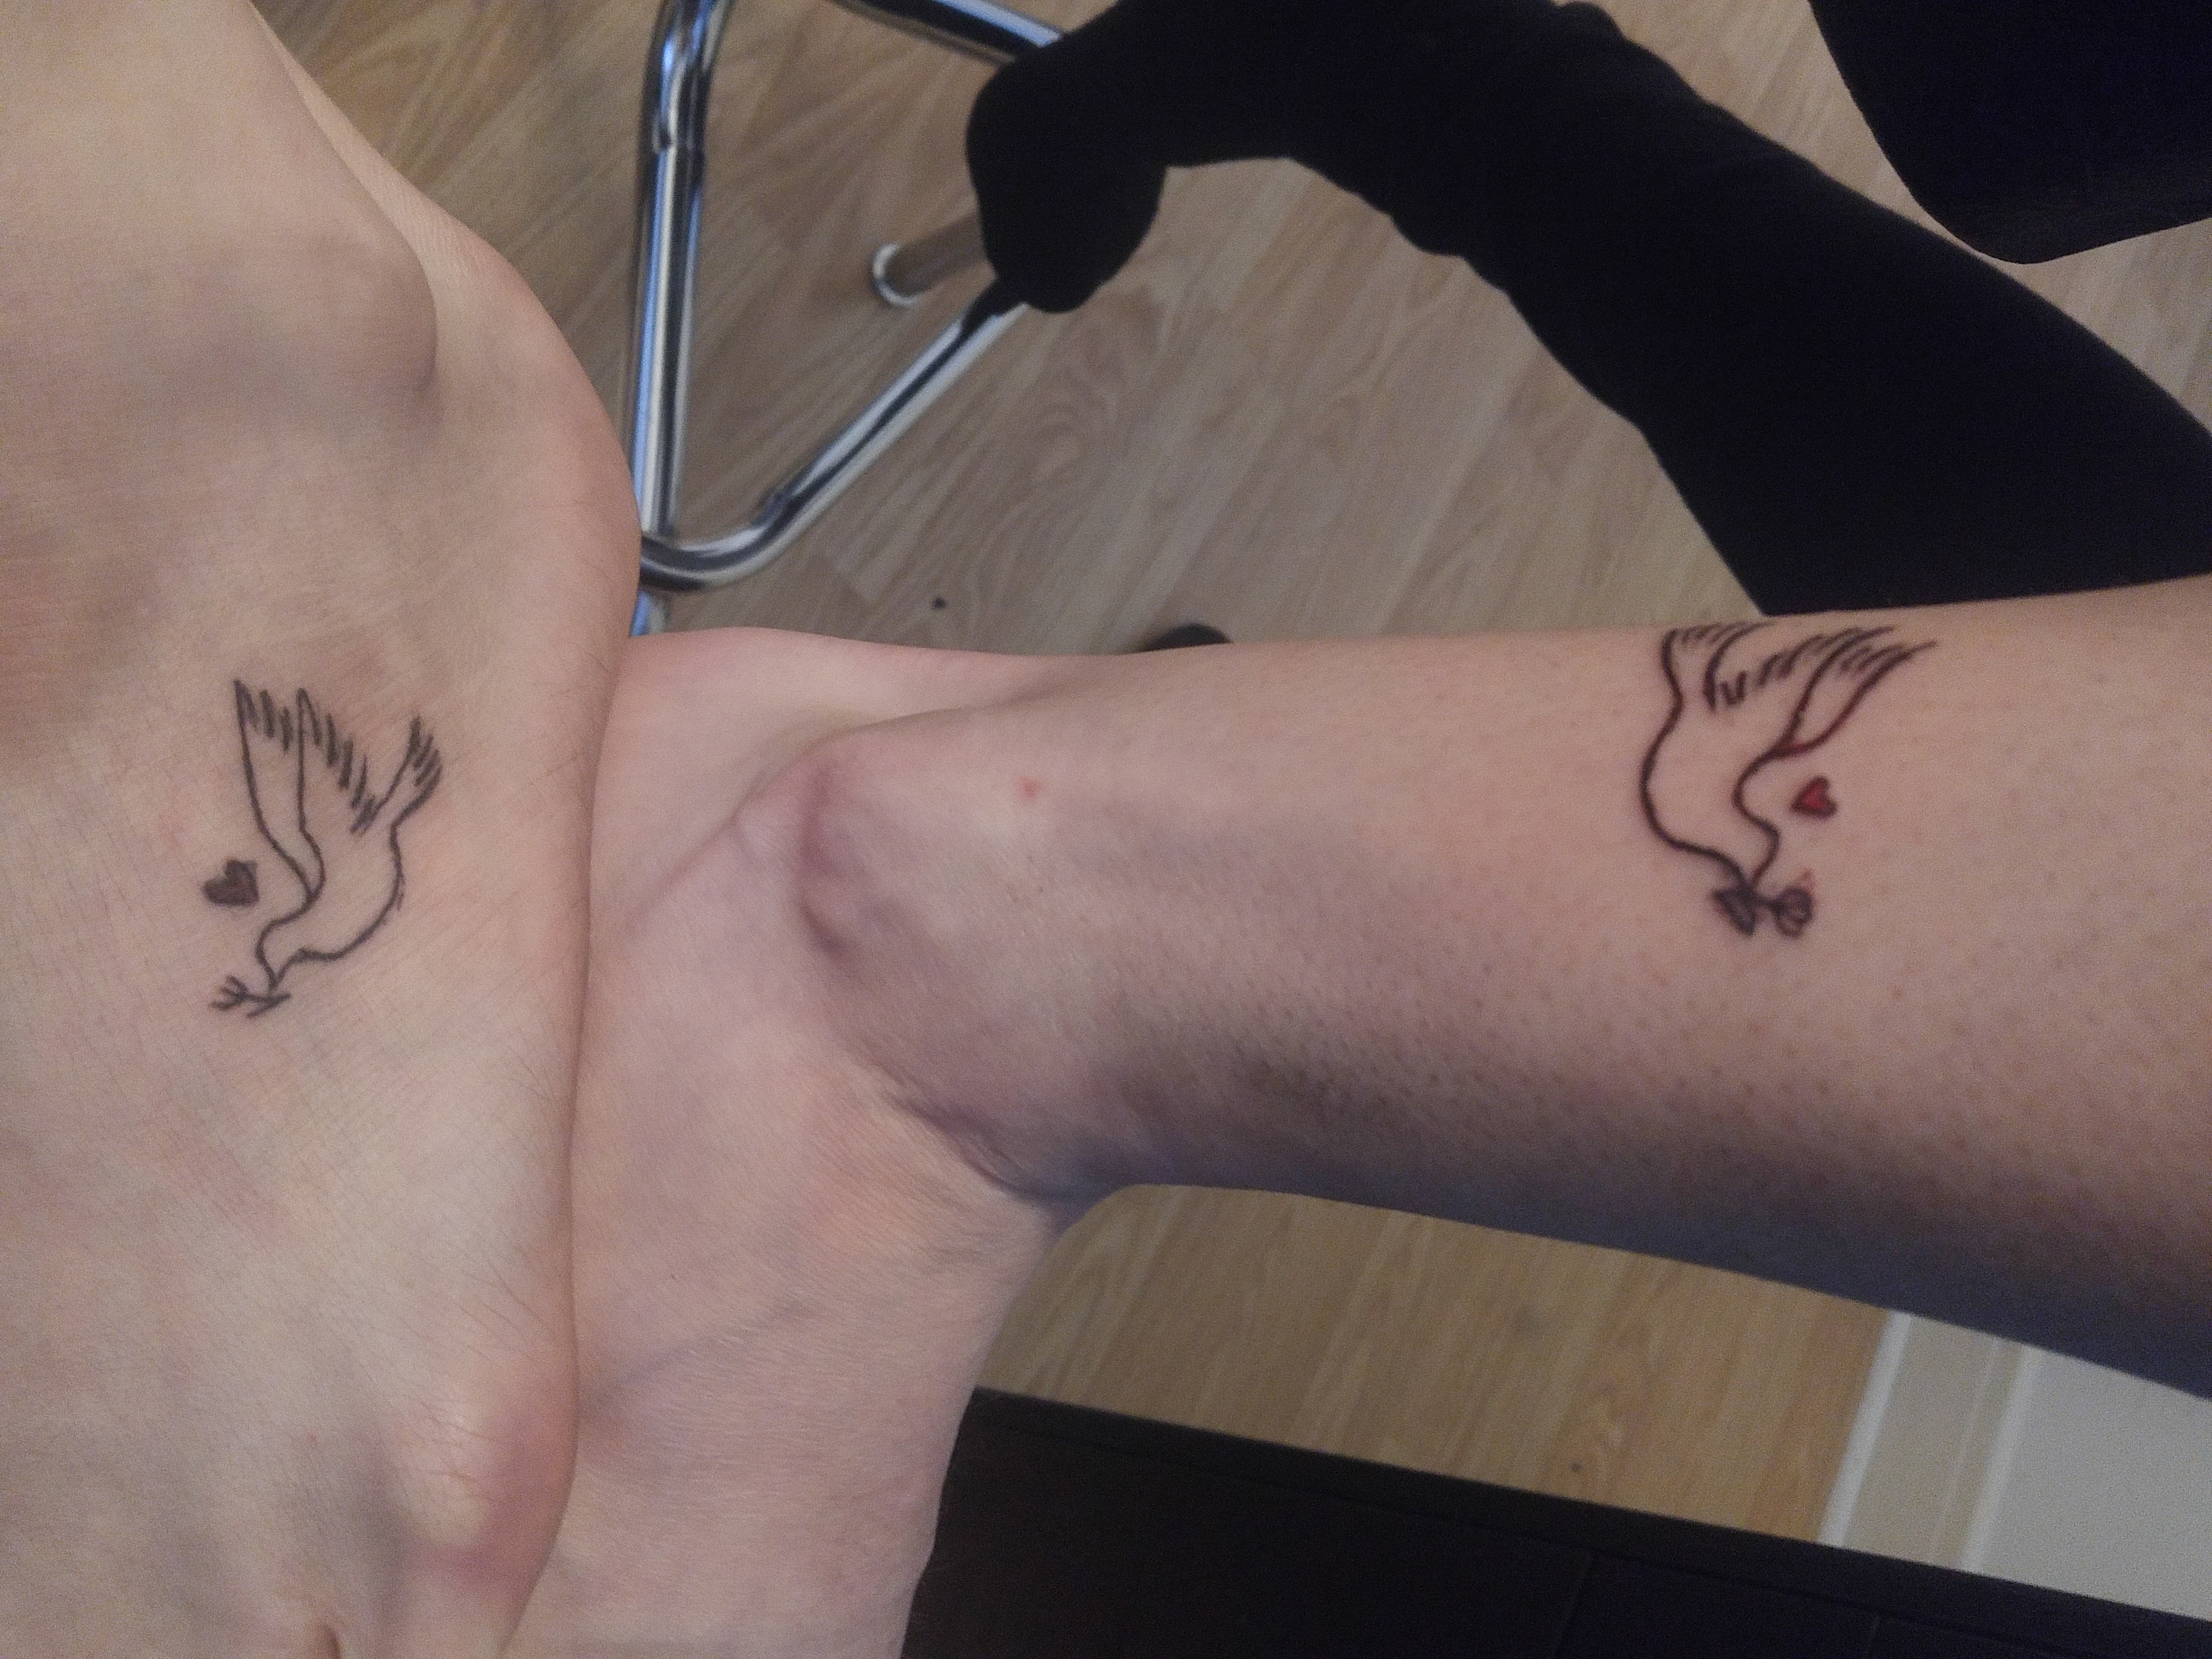 Jo-Ann and my own feet pressed together, showing our tattooes like a mirror image to eachother.